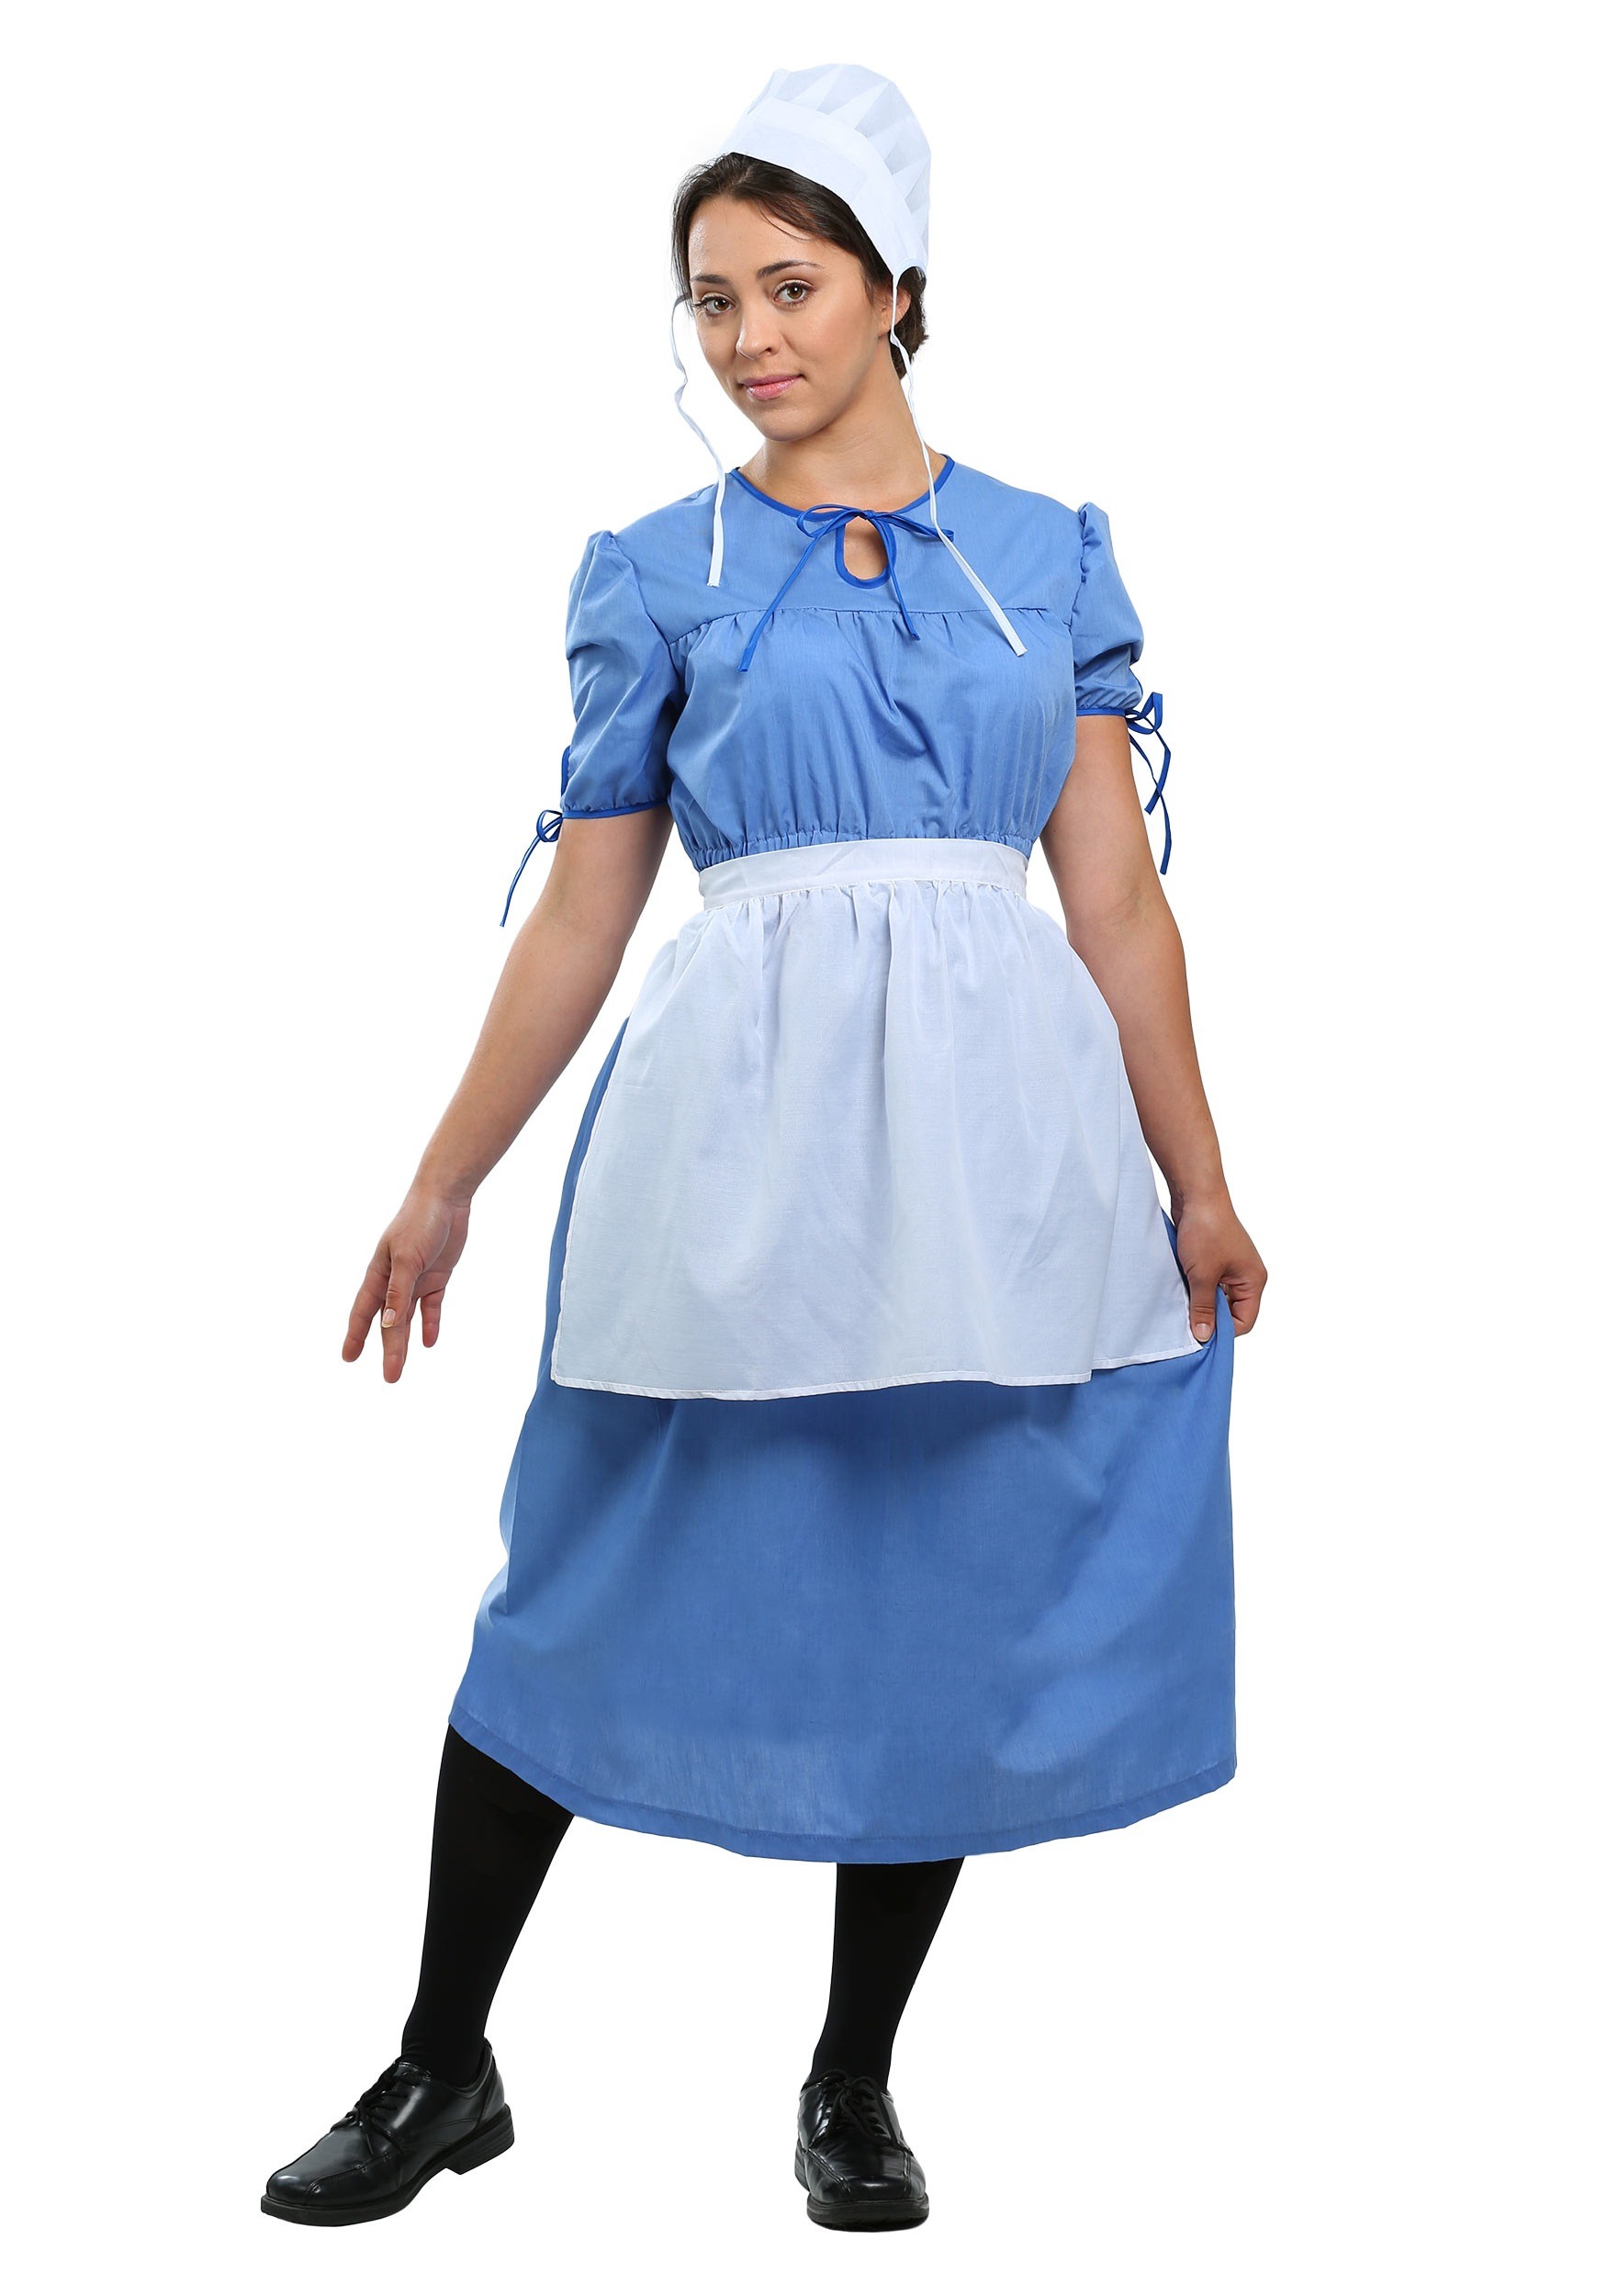 Photos - Fancy Dress FUN Costumes Adult Amish Prairie Costume Dress | Colonial Costumes Blue